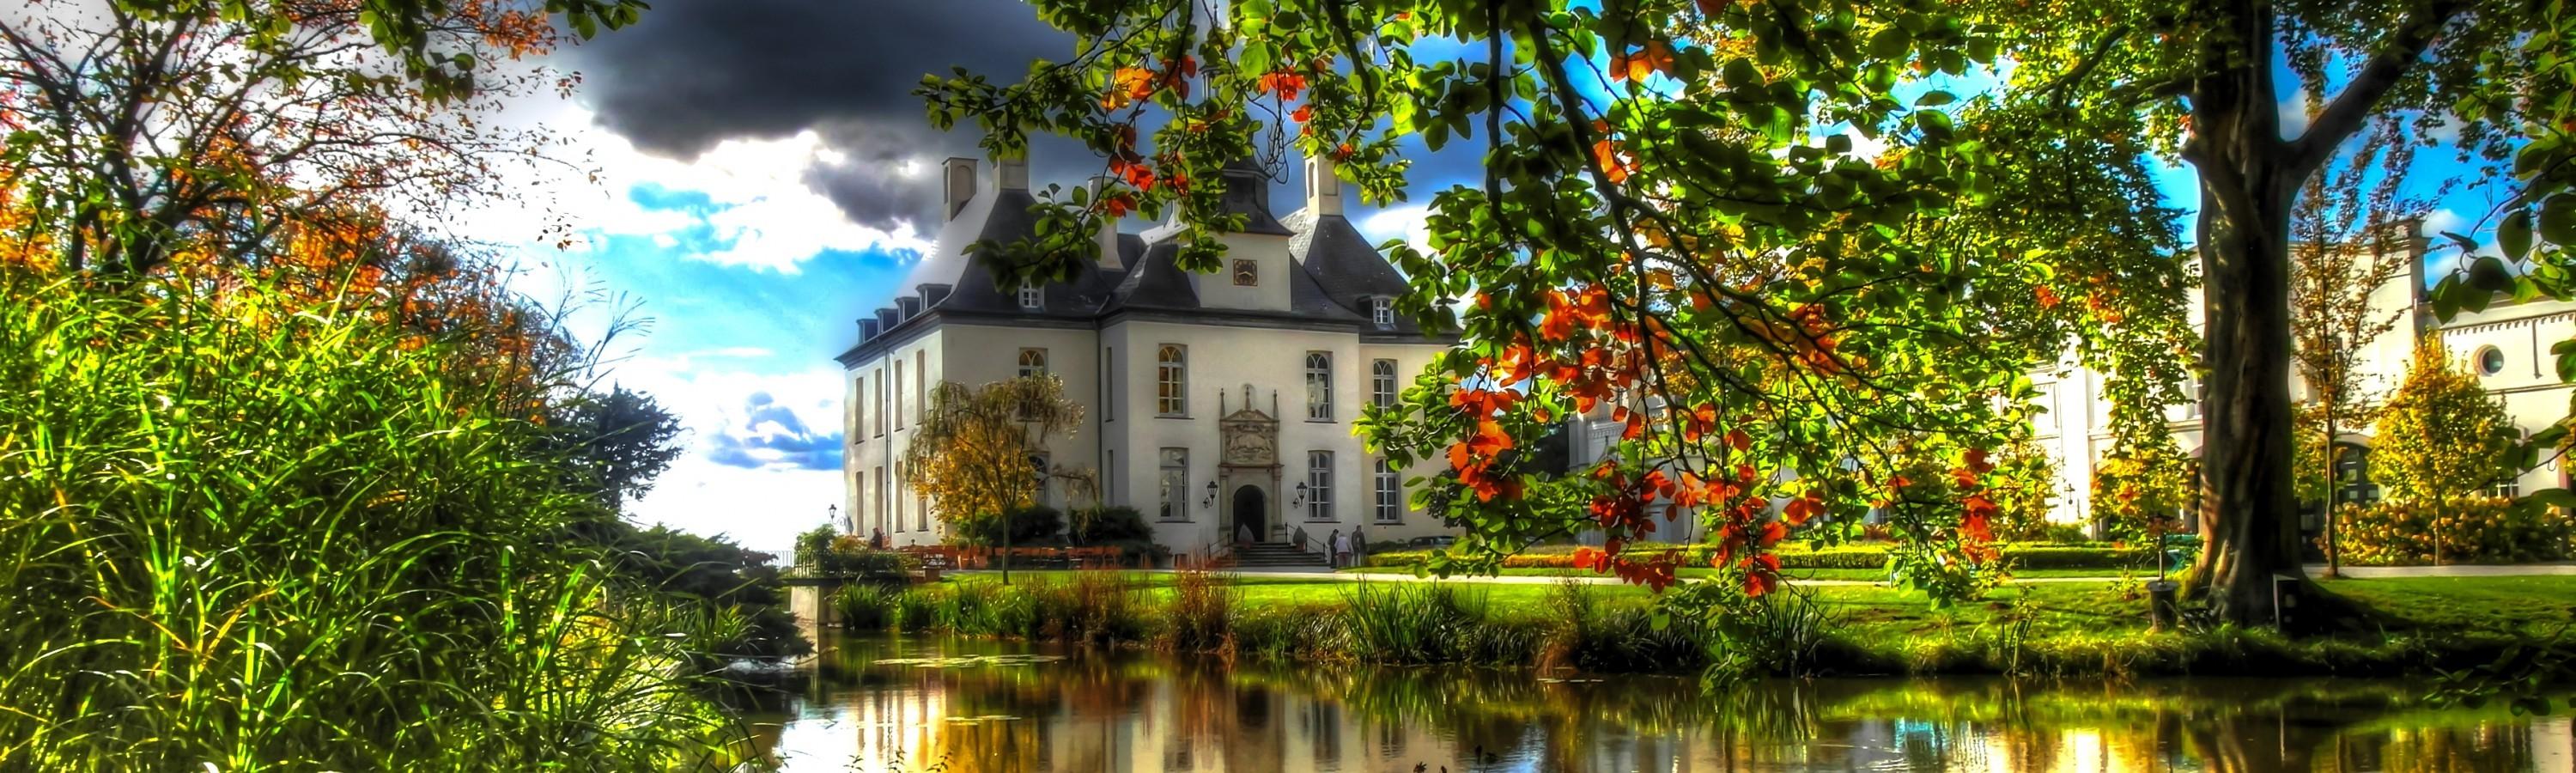 Download 3000x900 Big House, River, Water Reflection, Like Fairytale